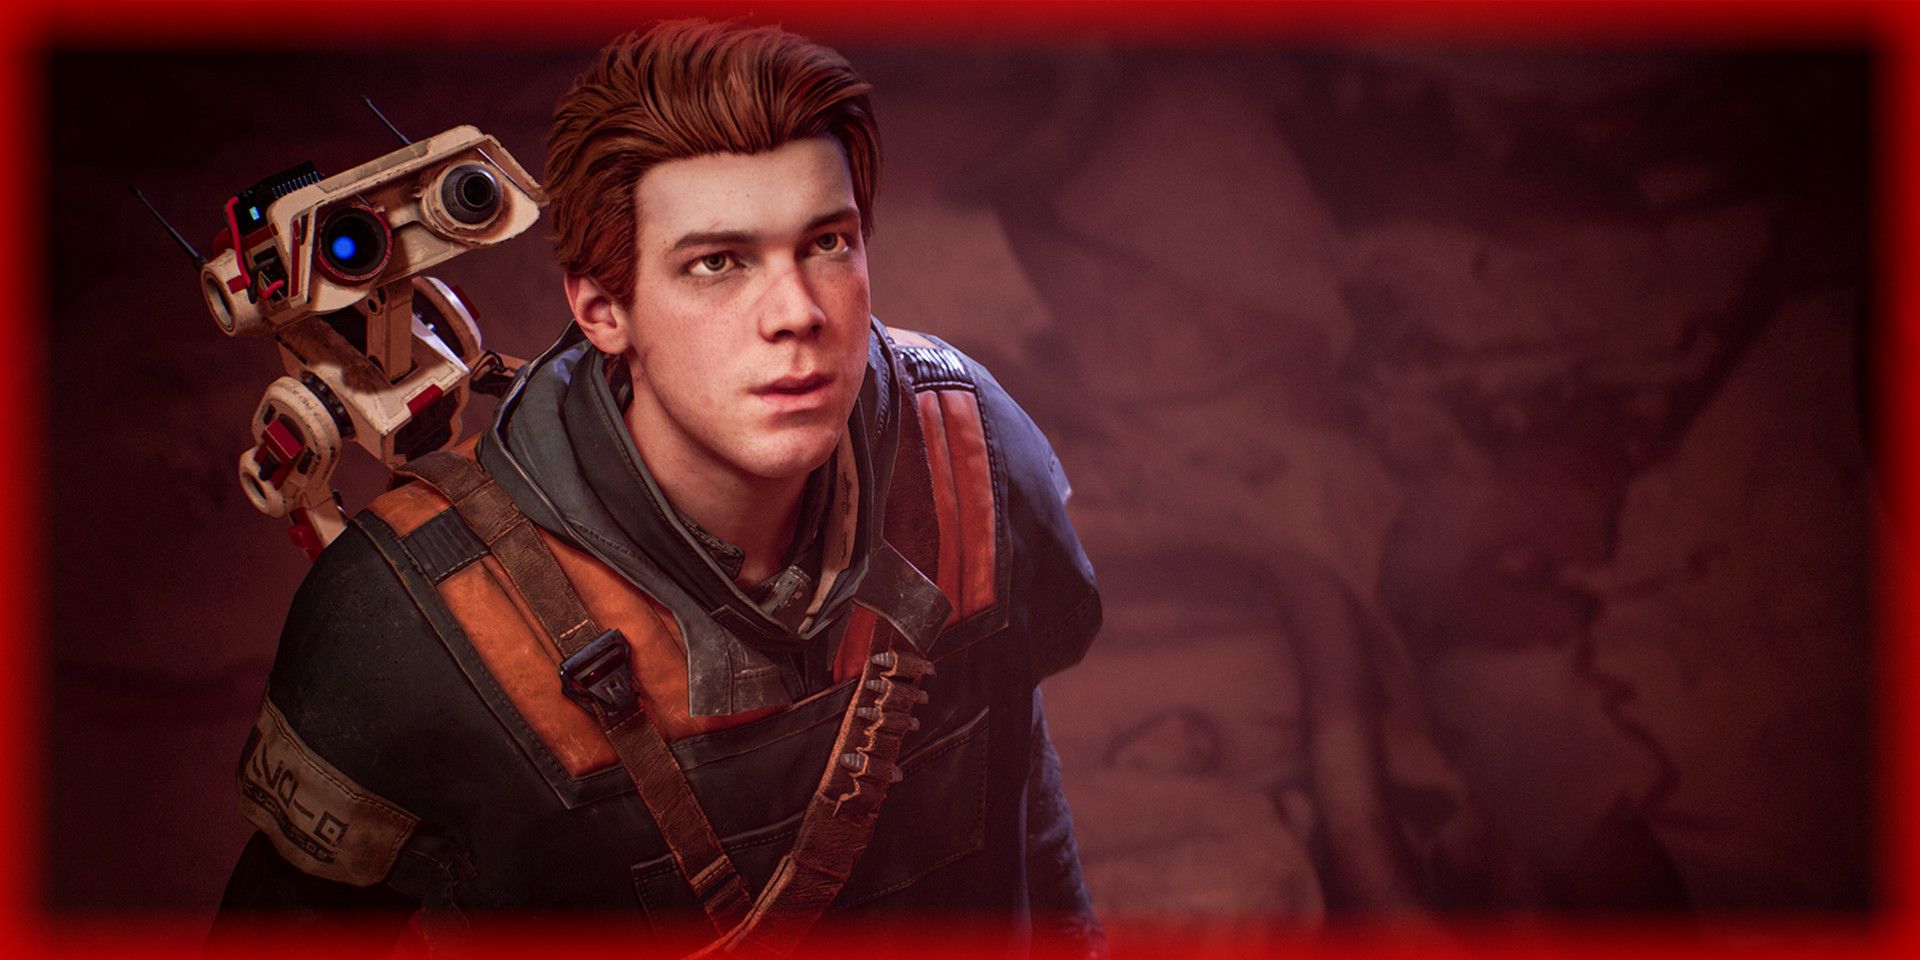 Star Wars Jedi: Fallen Order Review - New EA/Respawn Game Is Hard